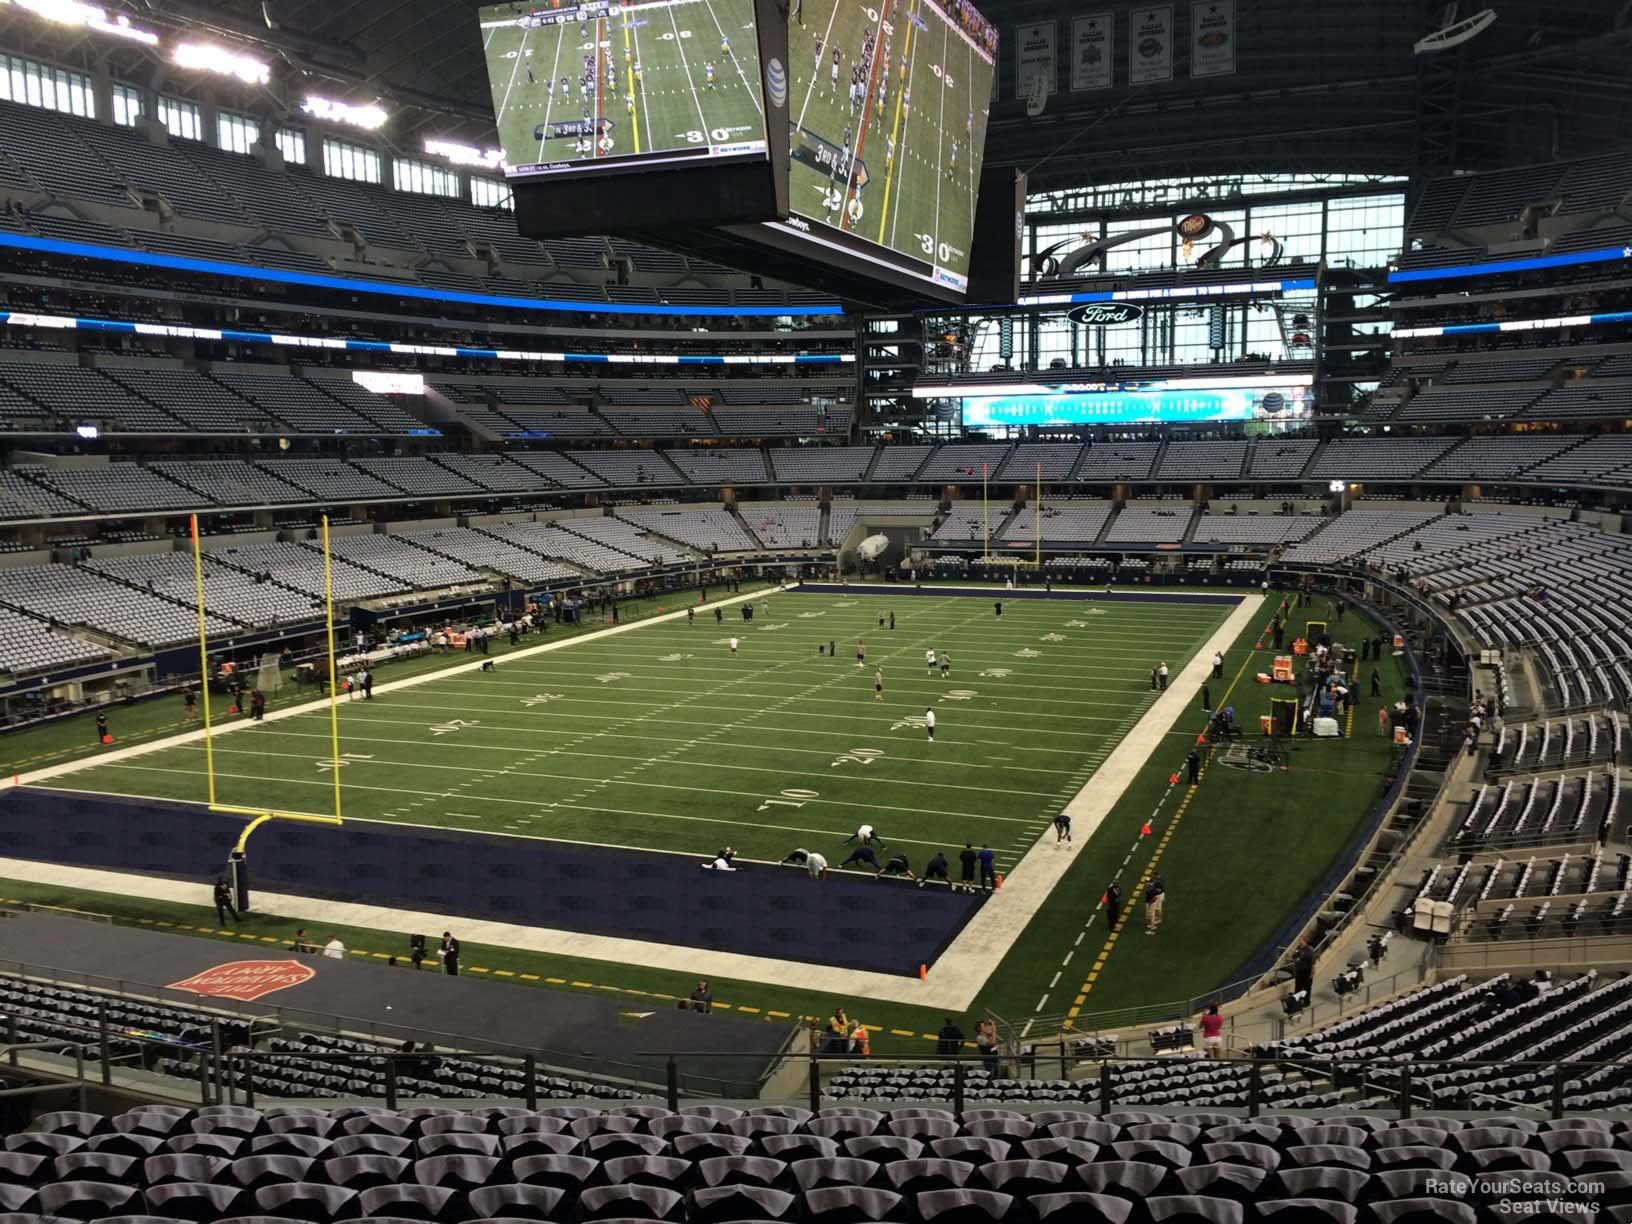 section 219, row 13 seat view  for football - at&t stadium (cowboys stadium)